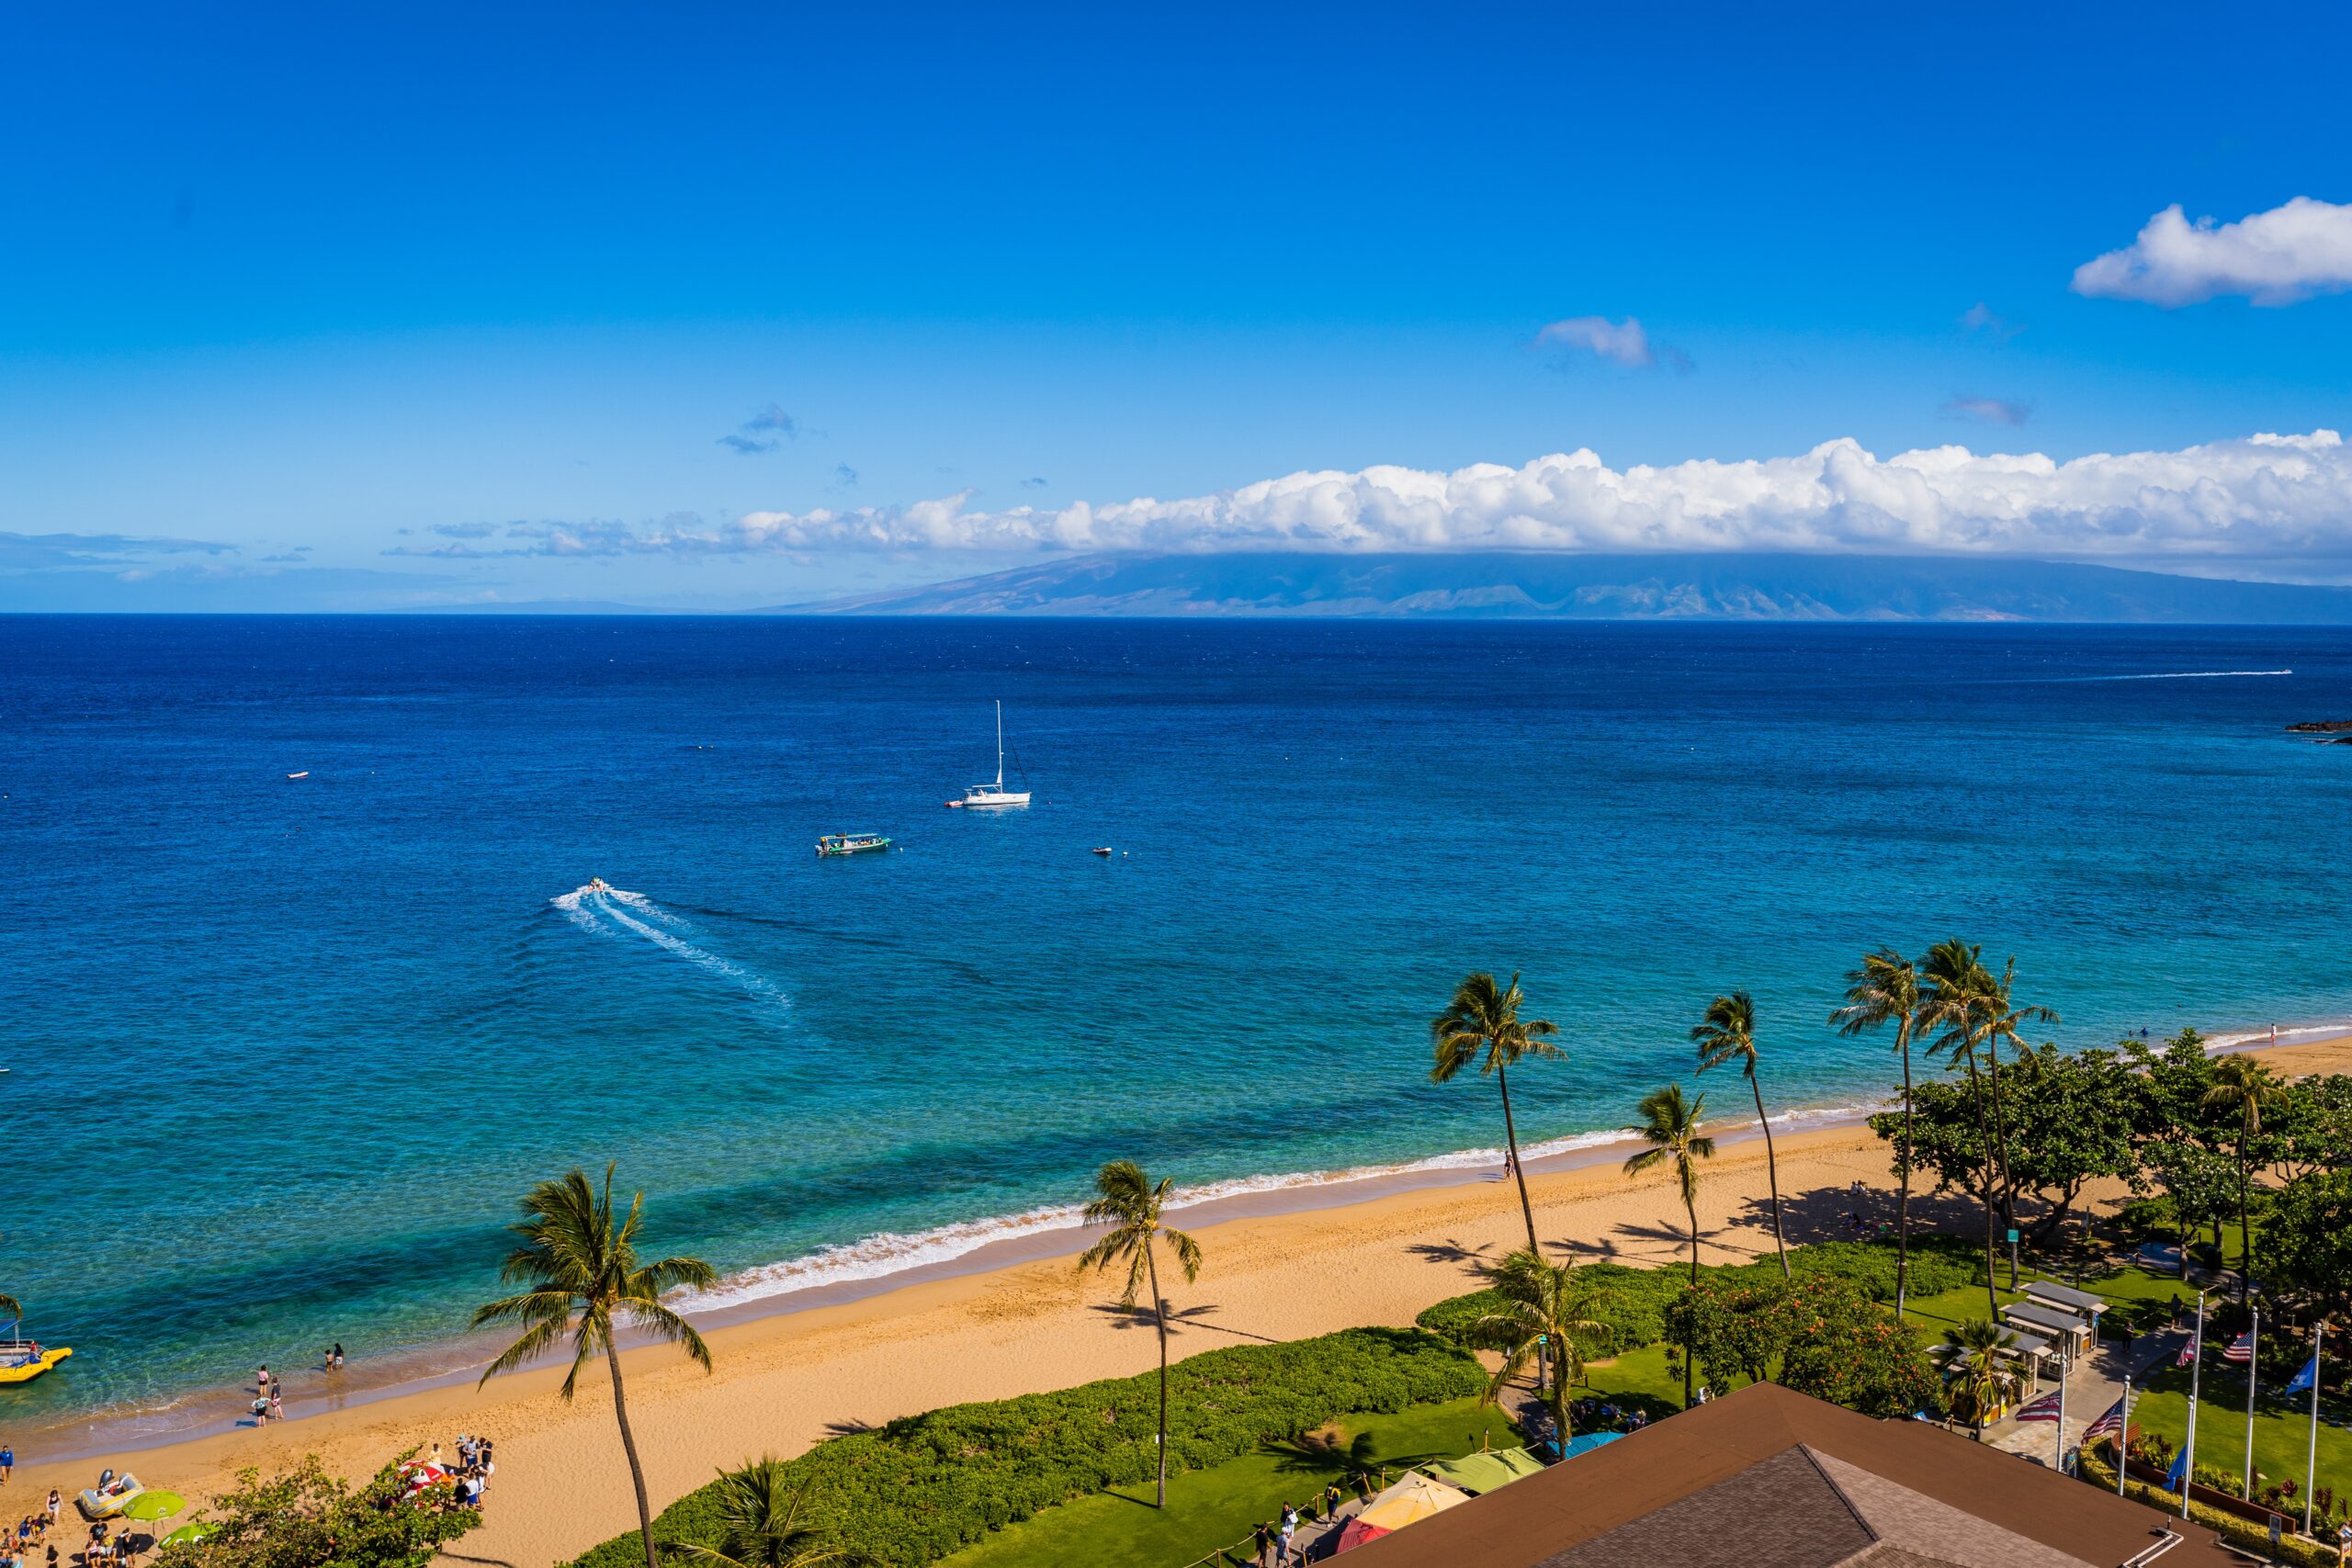 Maui is a beloved island that has many activities for visitors. 
Pictured: The shore of Maui with a oceanfront resort and beach goers 